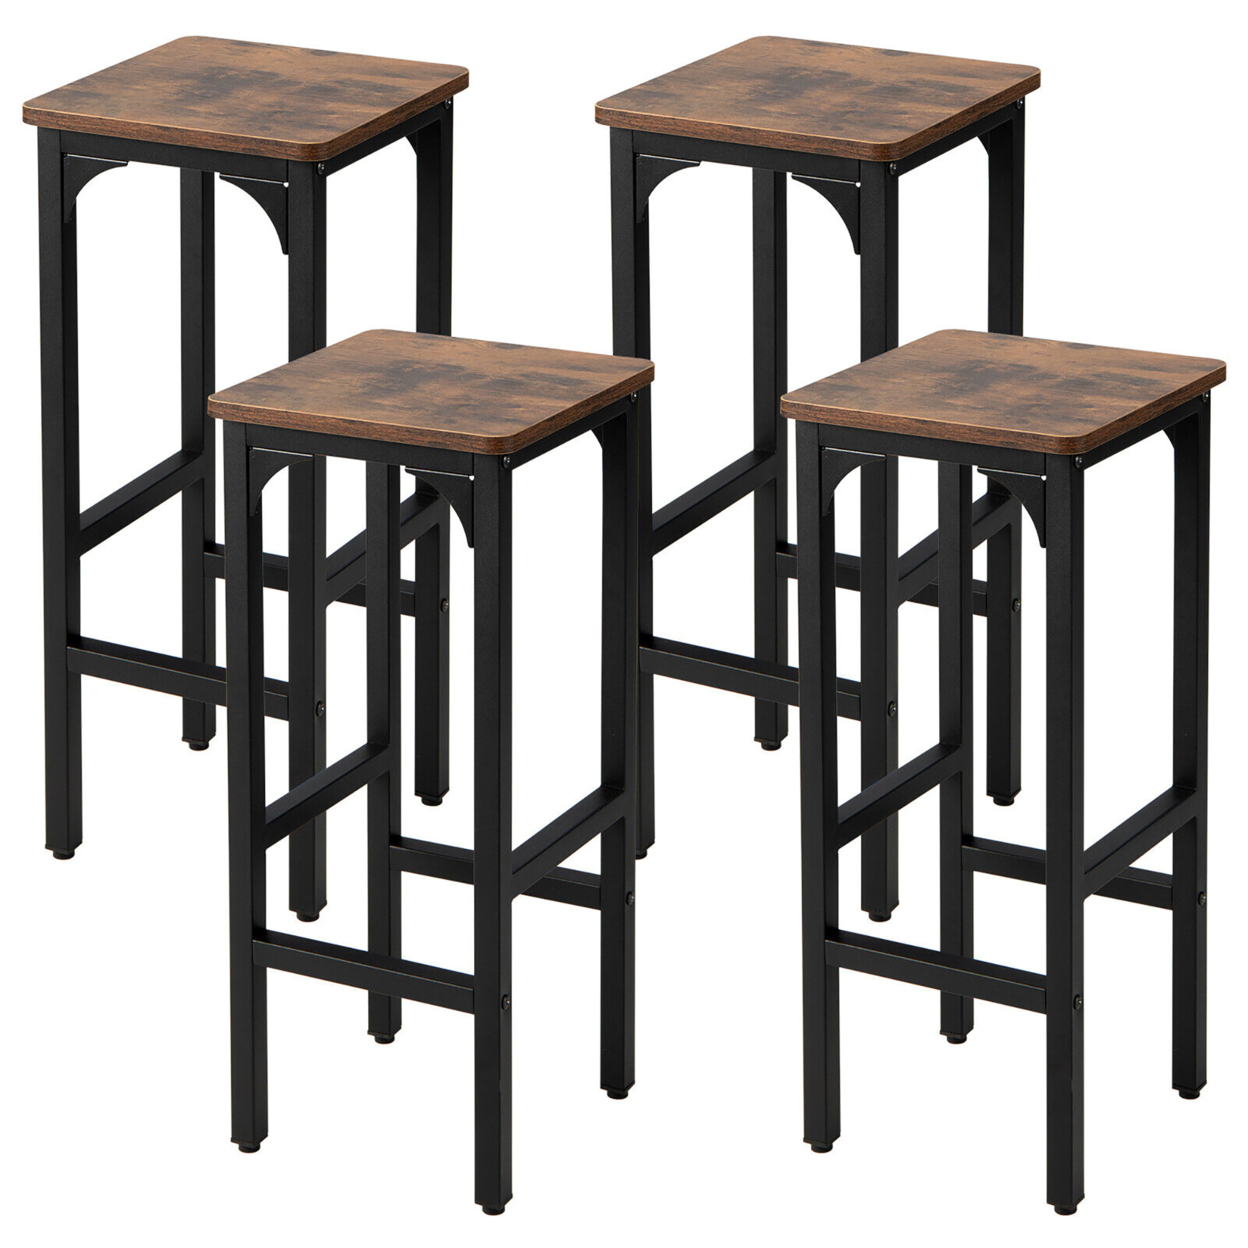 Set Of 4 Industrial Bar Stools 28'' Kitchen Breakfast Bar Chairs Rustic Brown